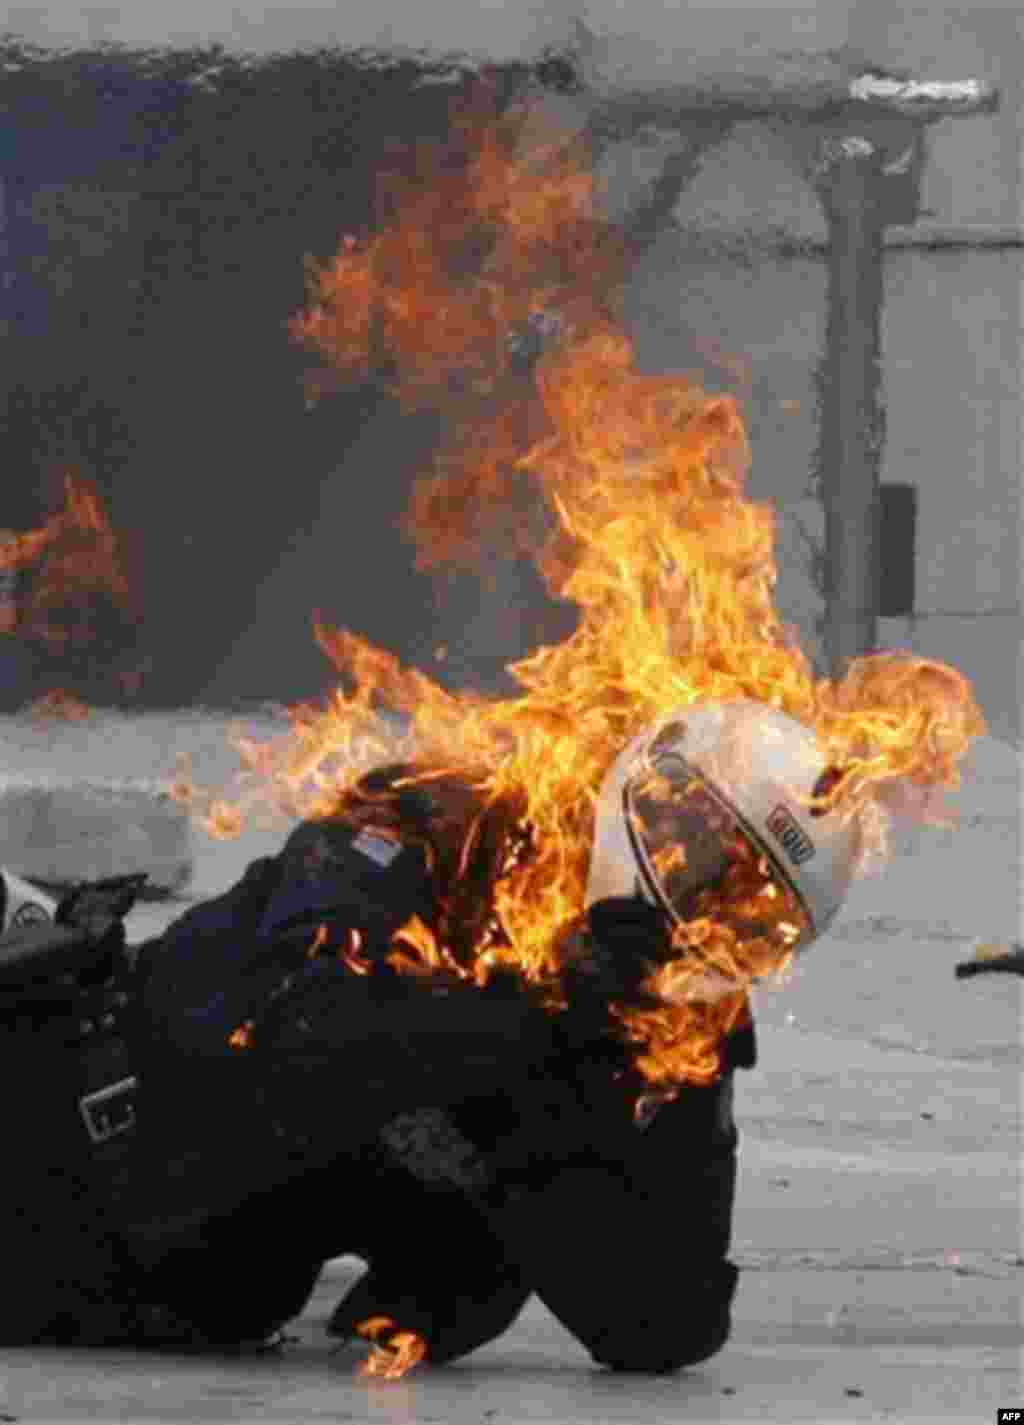 A motorcycle policeman tries to remove his helmet as he burns after protesters throw a petrol bomb in Athens, Wednesday, Fe. 23, 2011. Scores of youths hurled rocks and petrol bombs at riot police after clashes broke out Wednesday during a mass rally taki